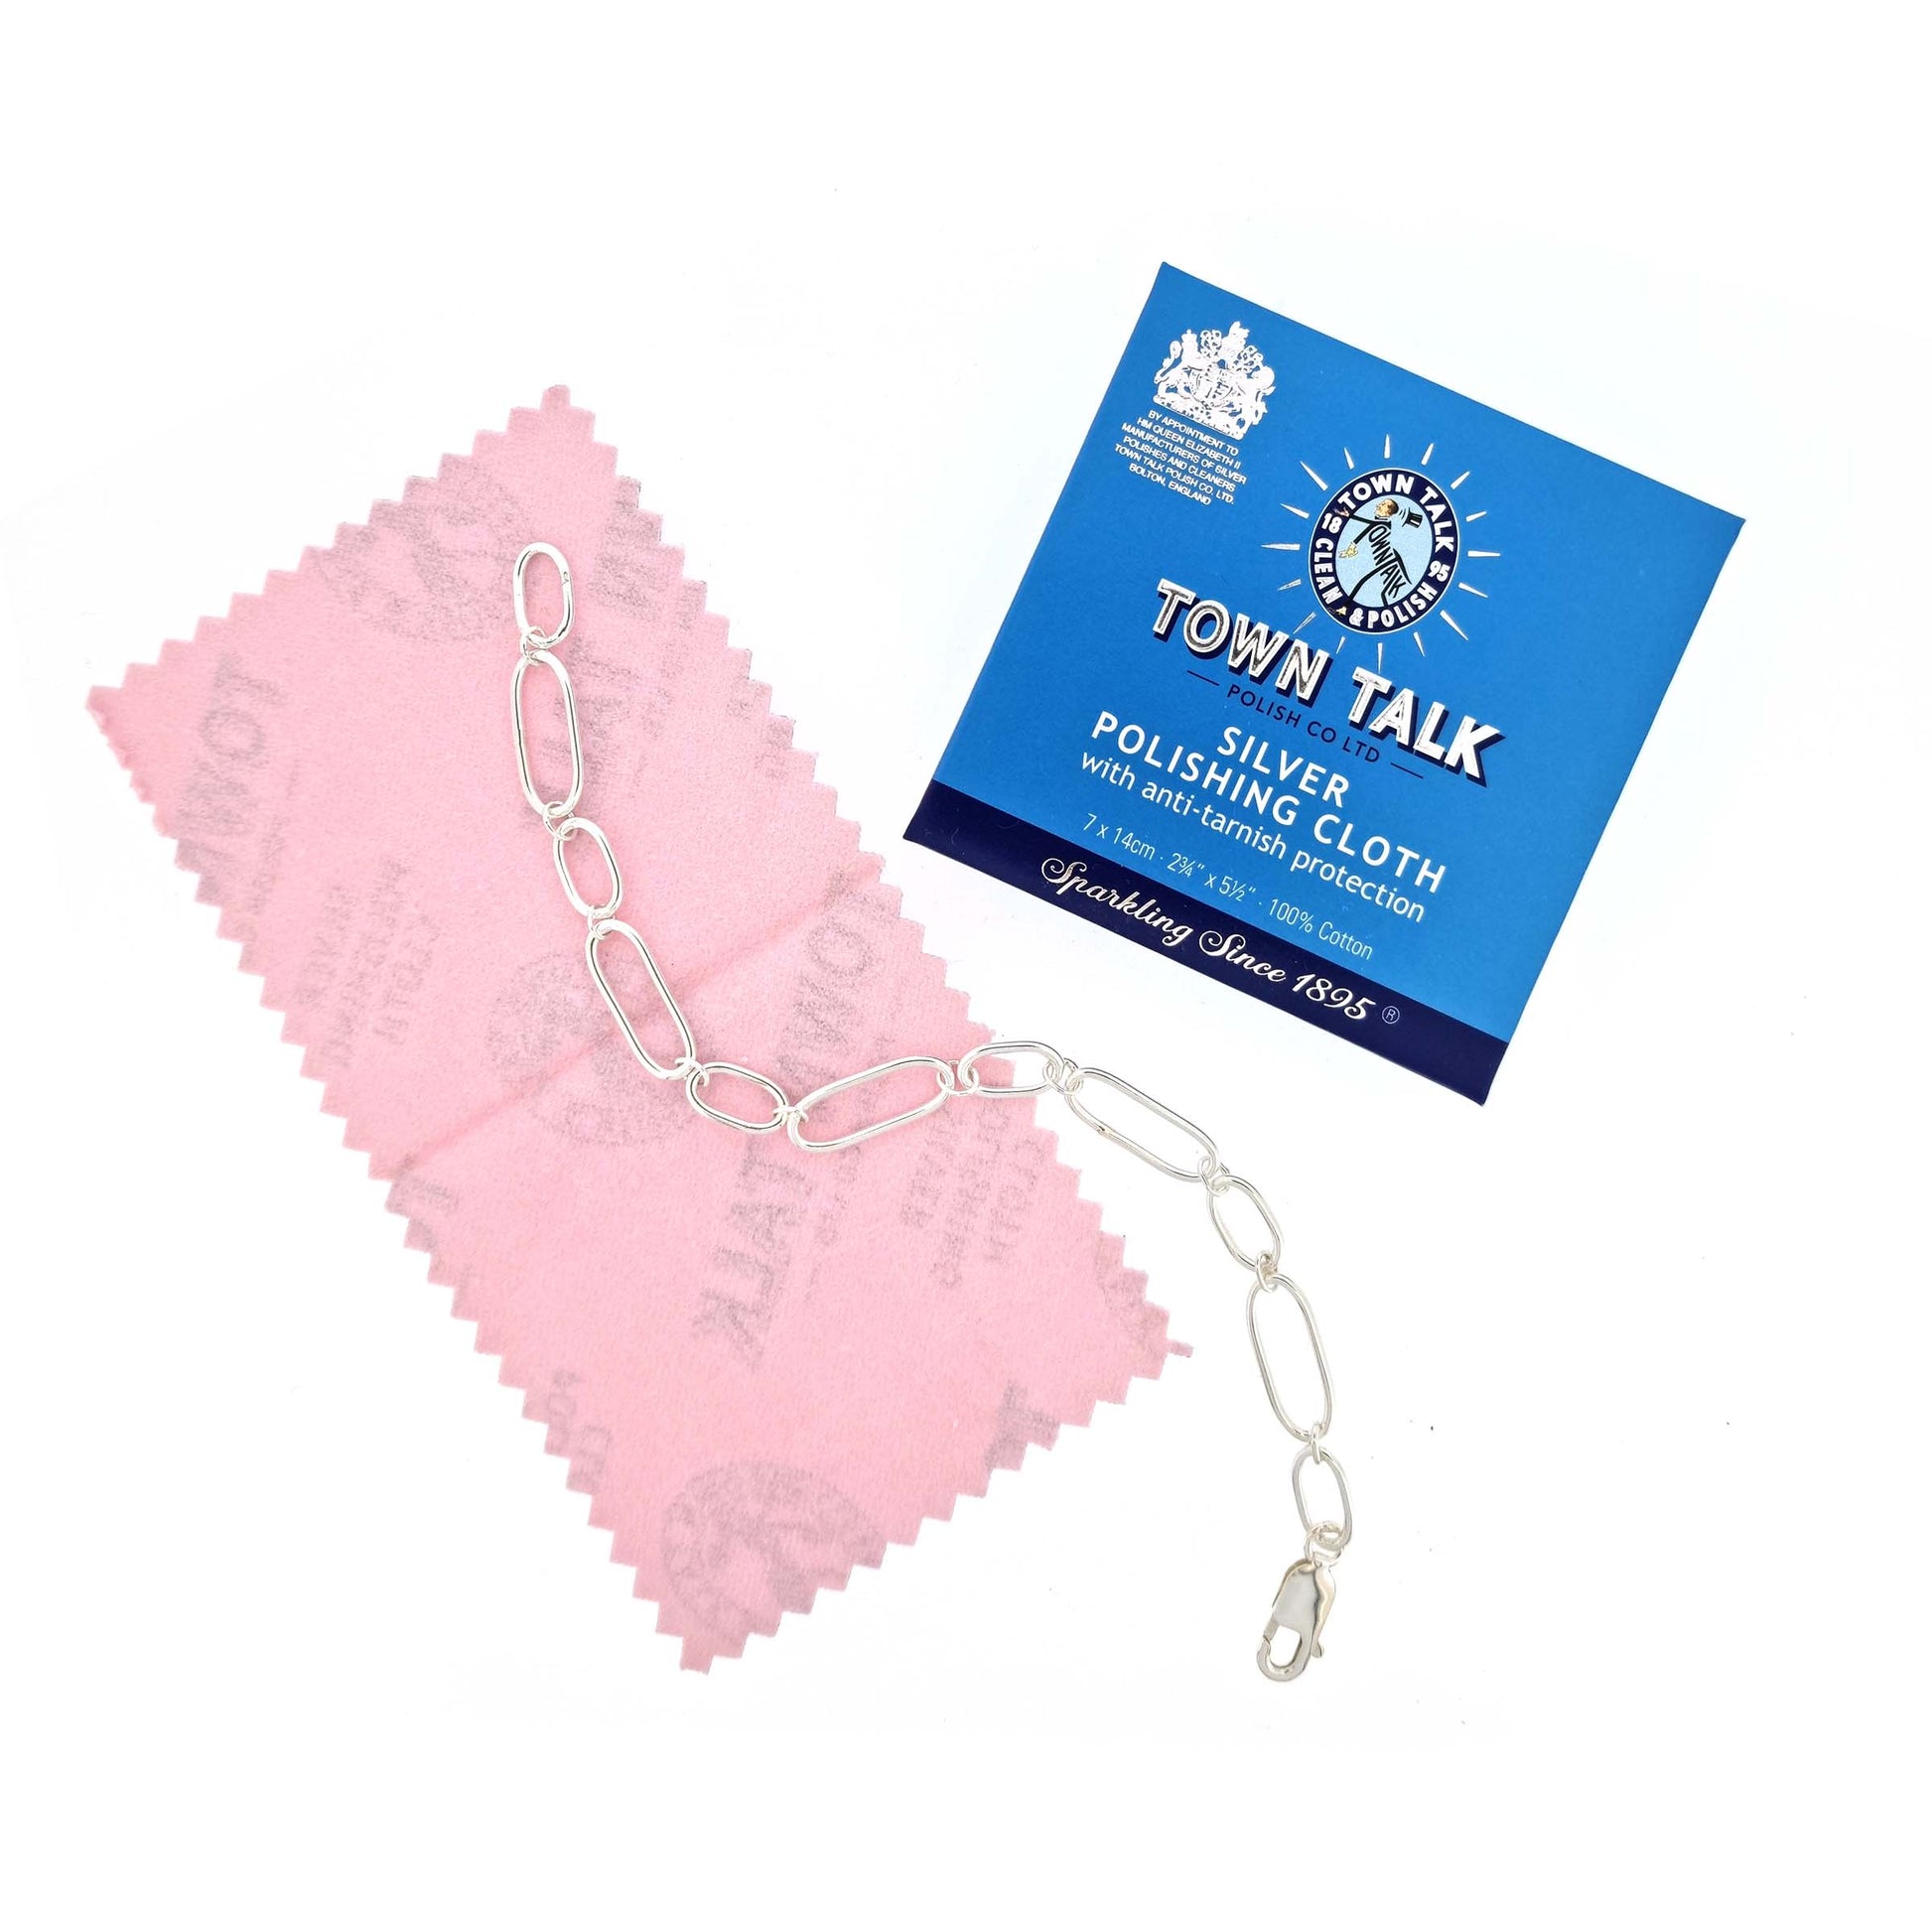 A pink coloured silver polishing cloth by Town Talk pictured with a silver bracelet.